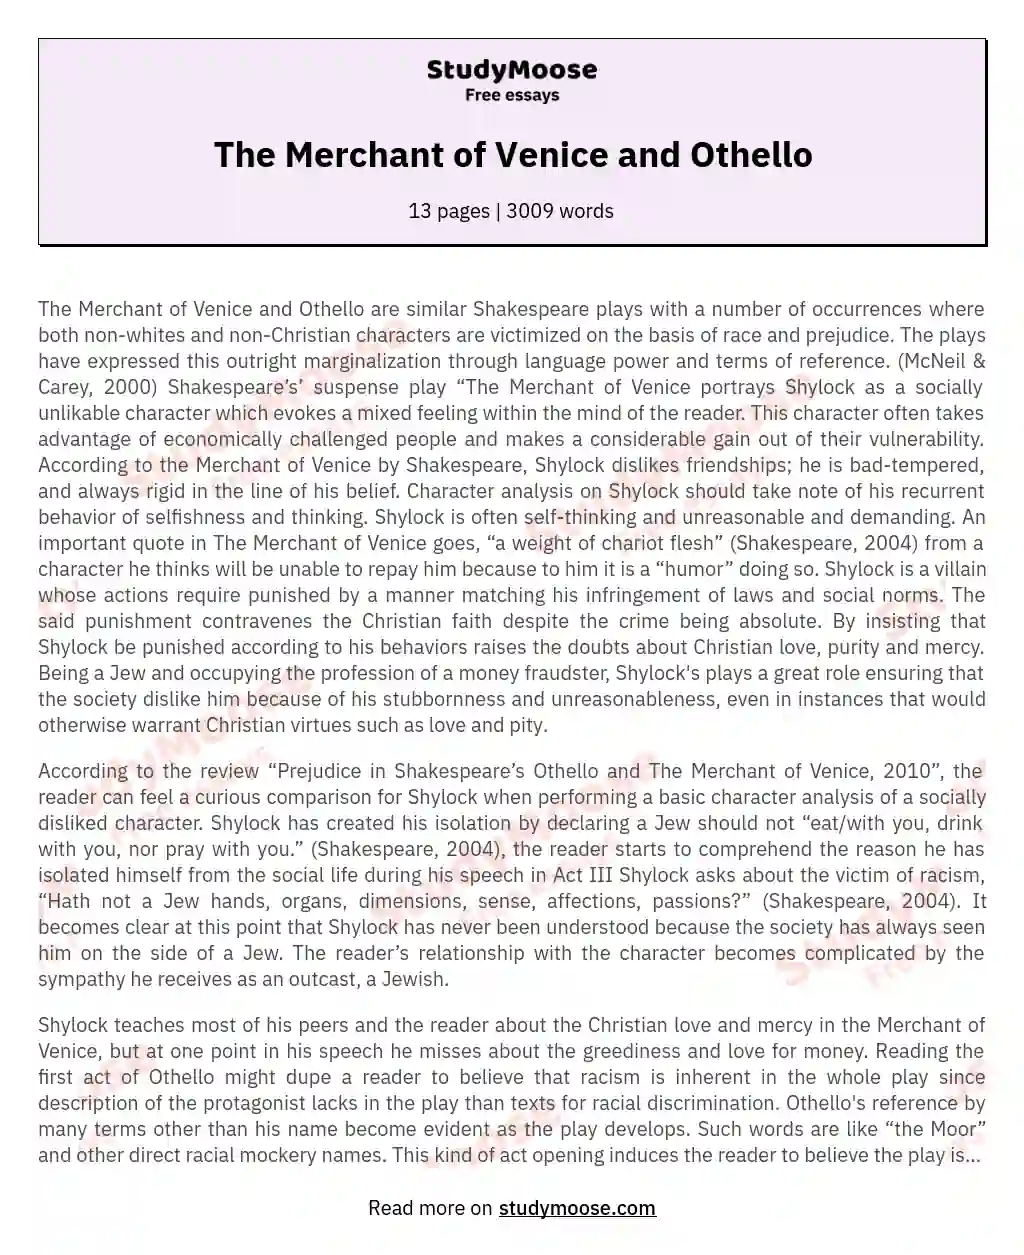 The Merchant of Venice and Othello